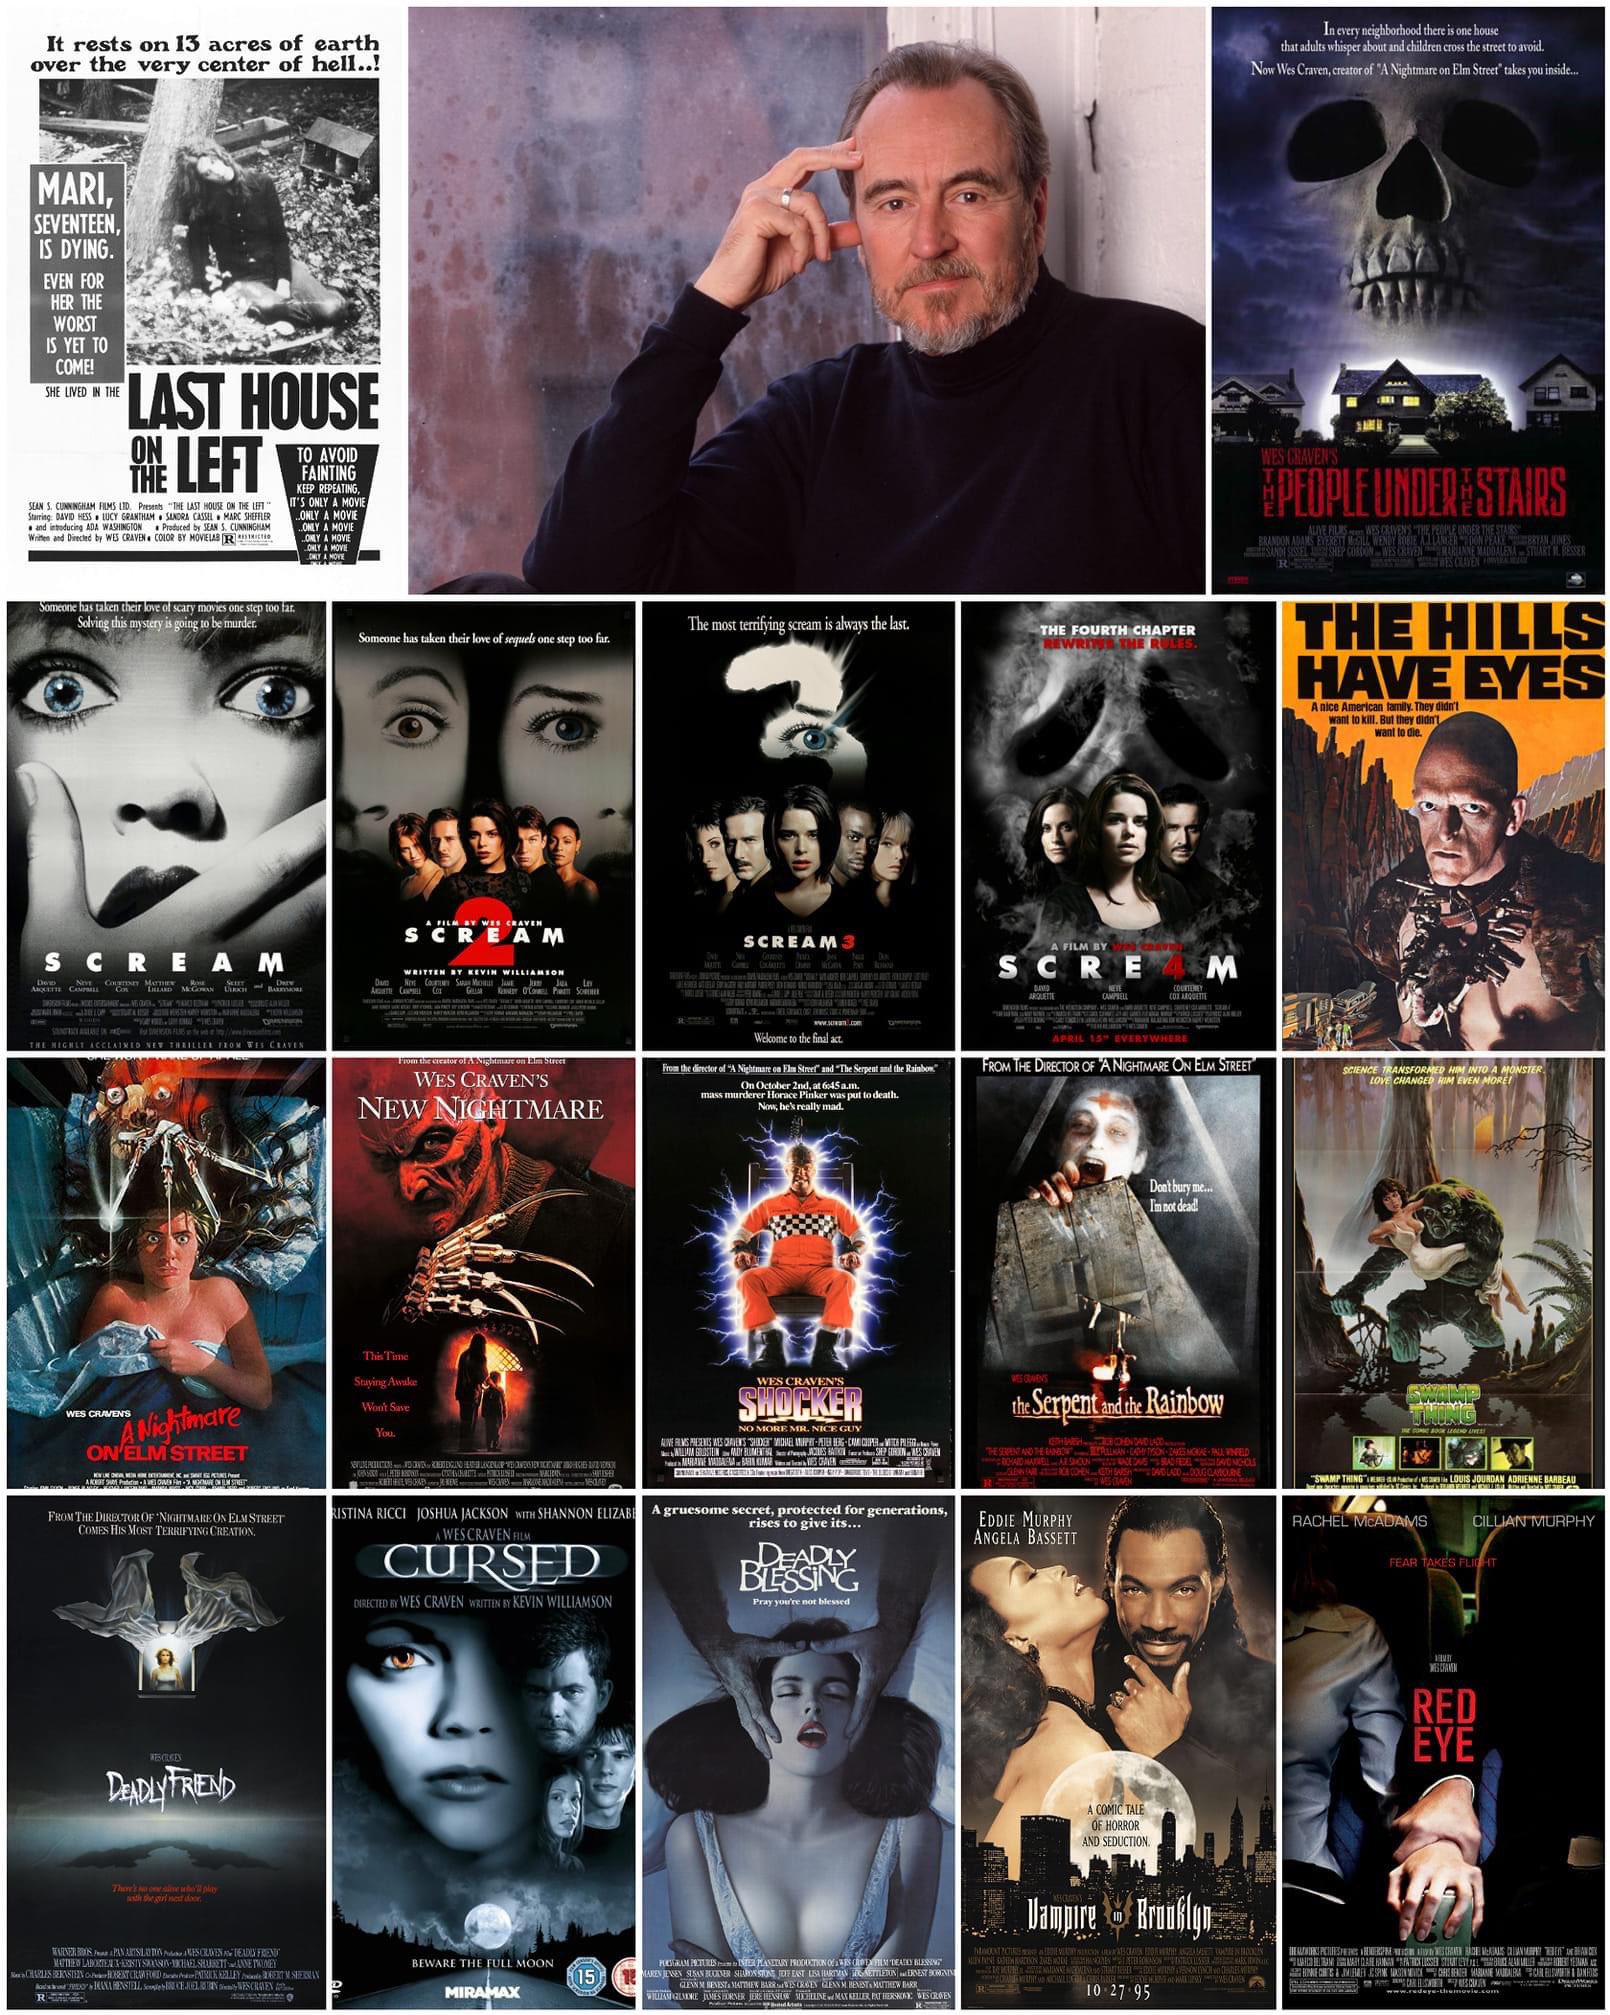 Happy Birthday Wes Craven! What is your favorite Wes Craven film? 